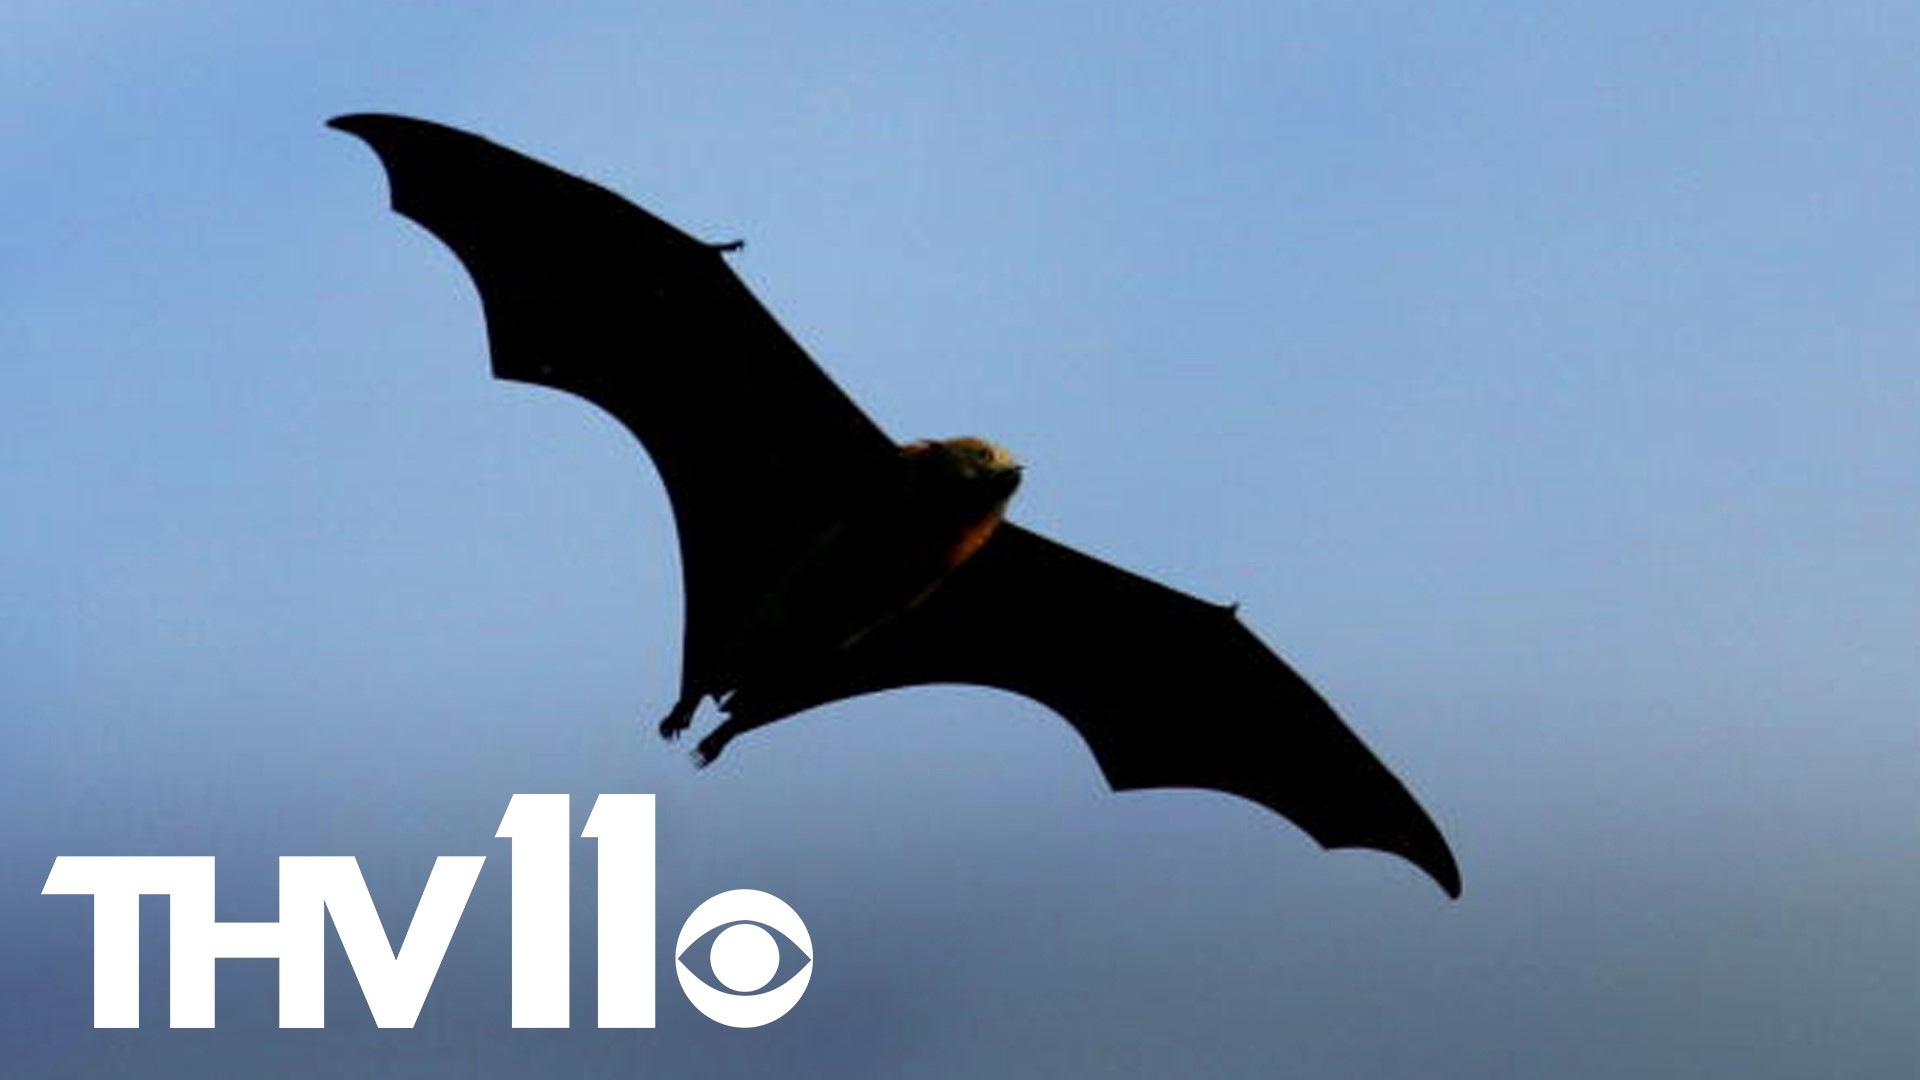 North Little Rock High School has been working to remove a colony of bats in the school, and students have been switched to virtual classes until they are removed.